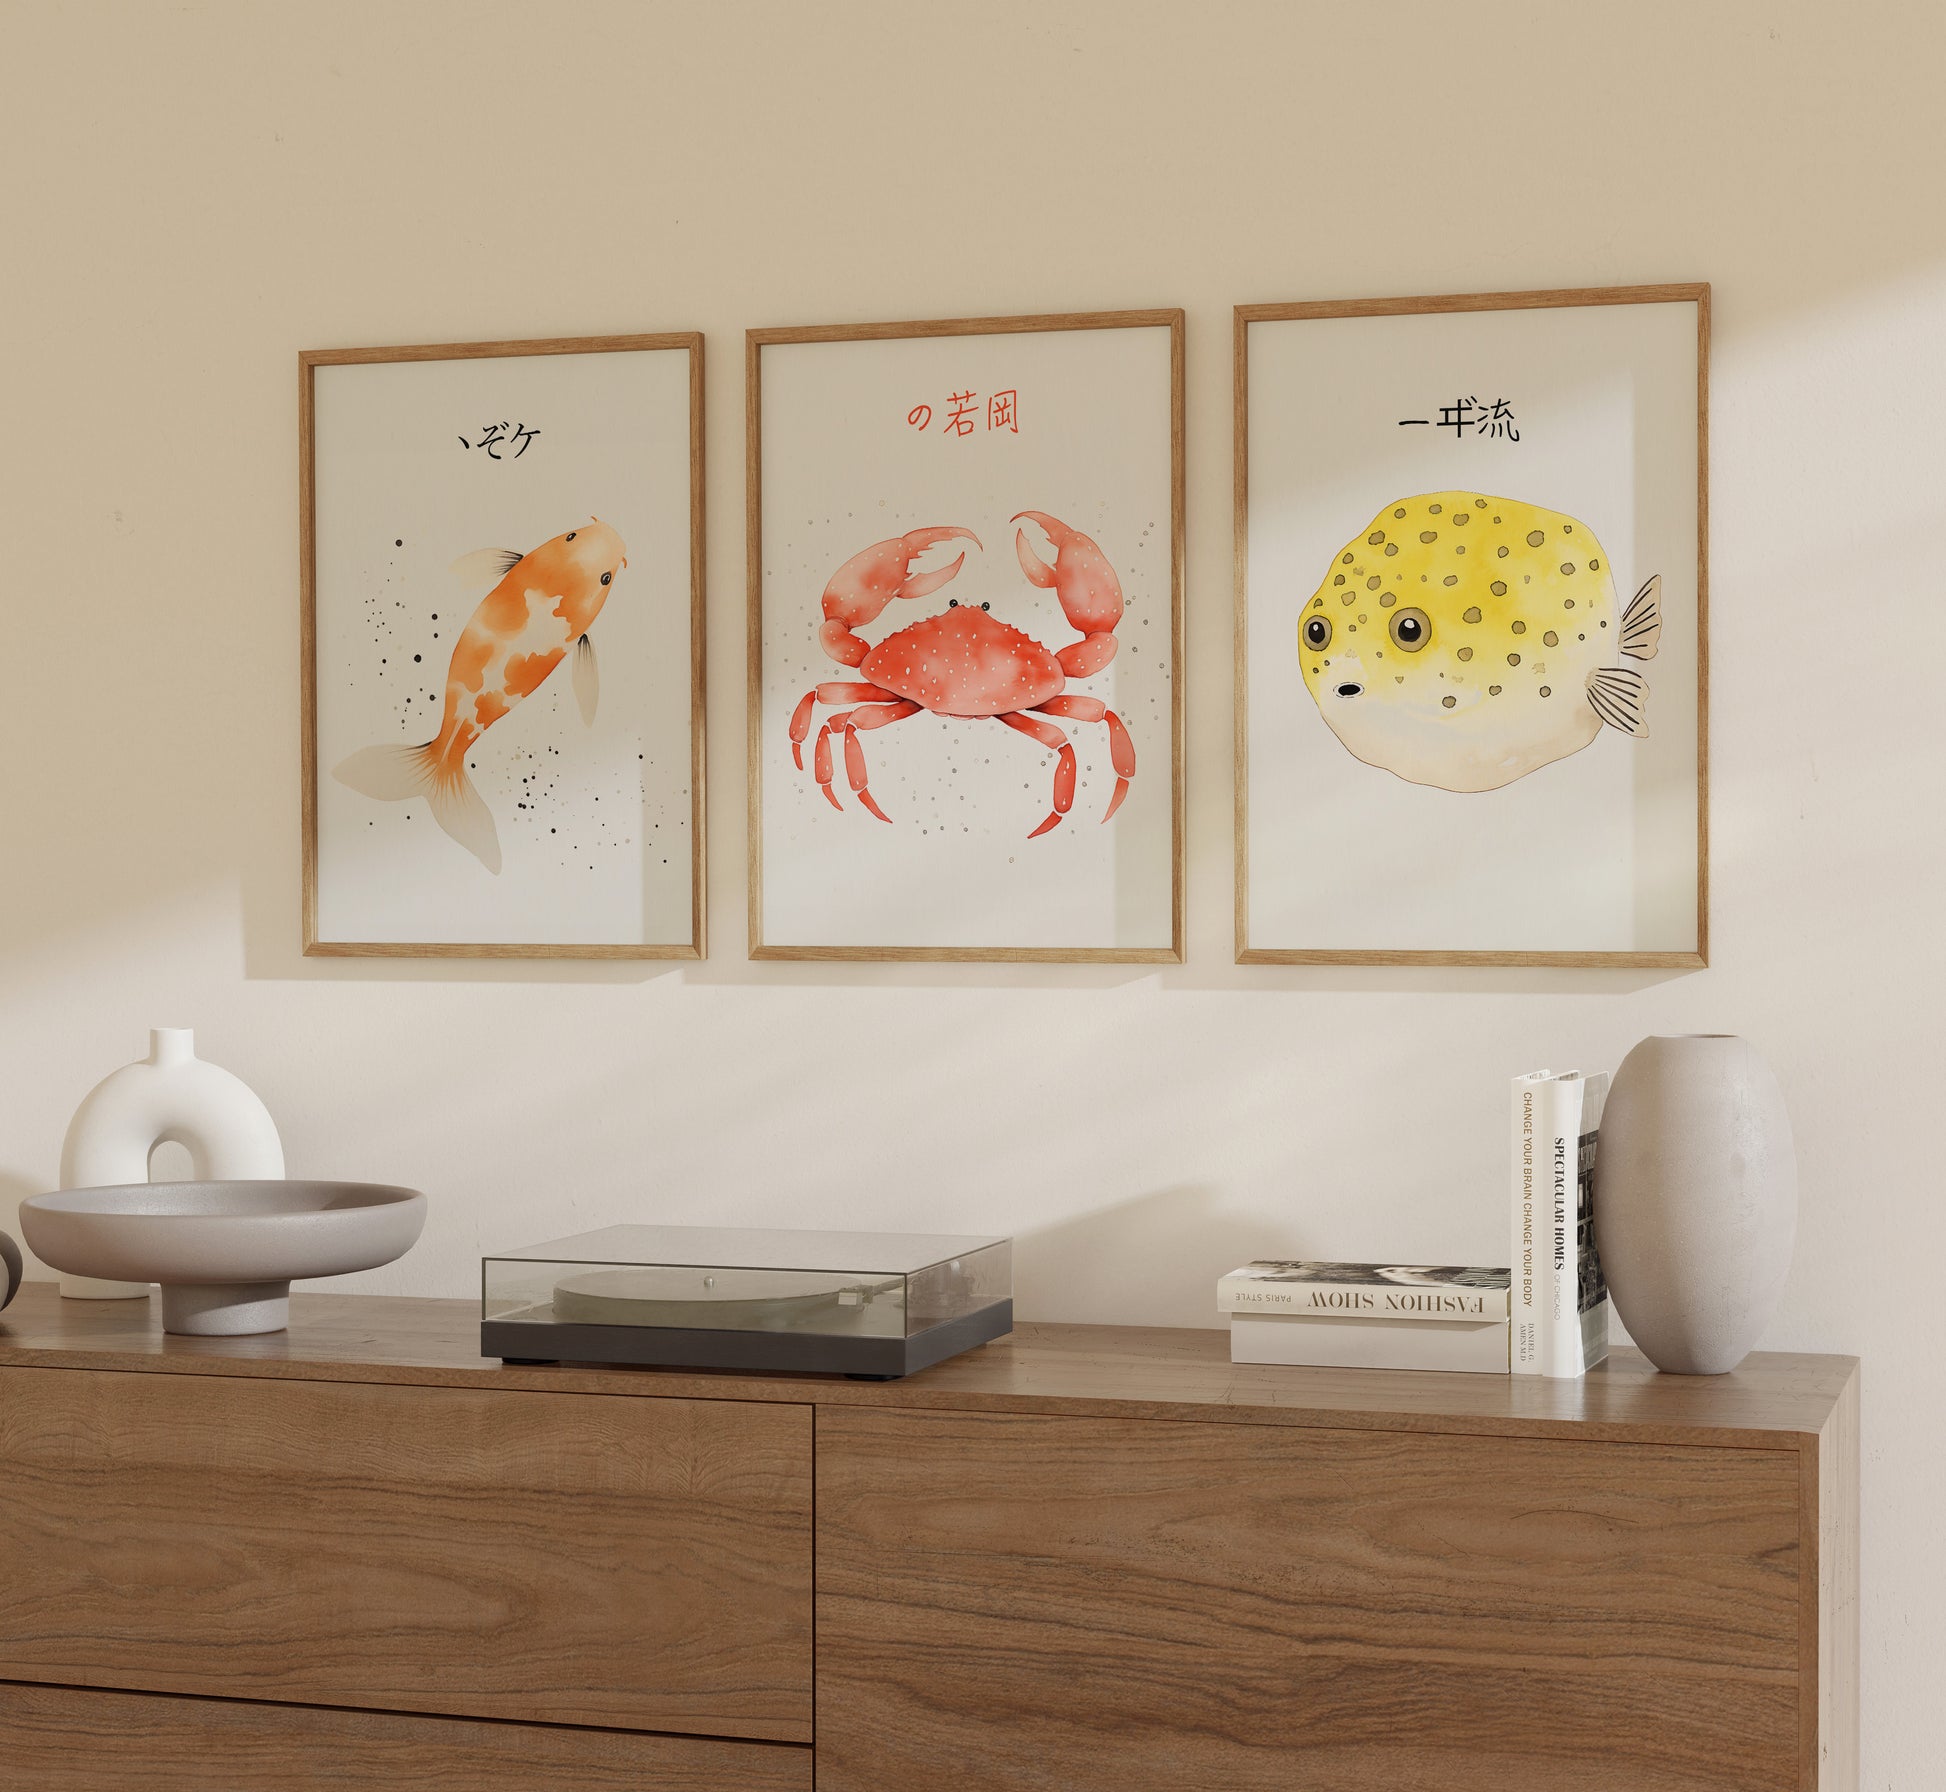 Three framed pictures of a koi fish, crab, and pufferfish on a wall above a wooden dresser.